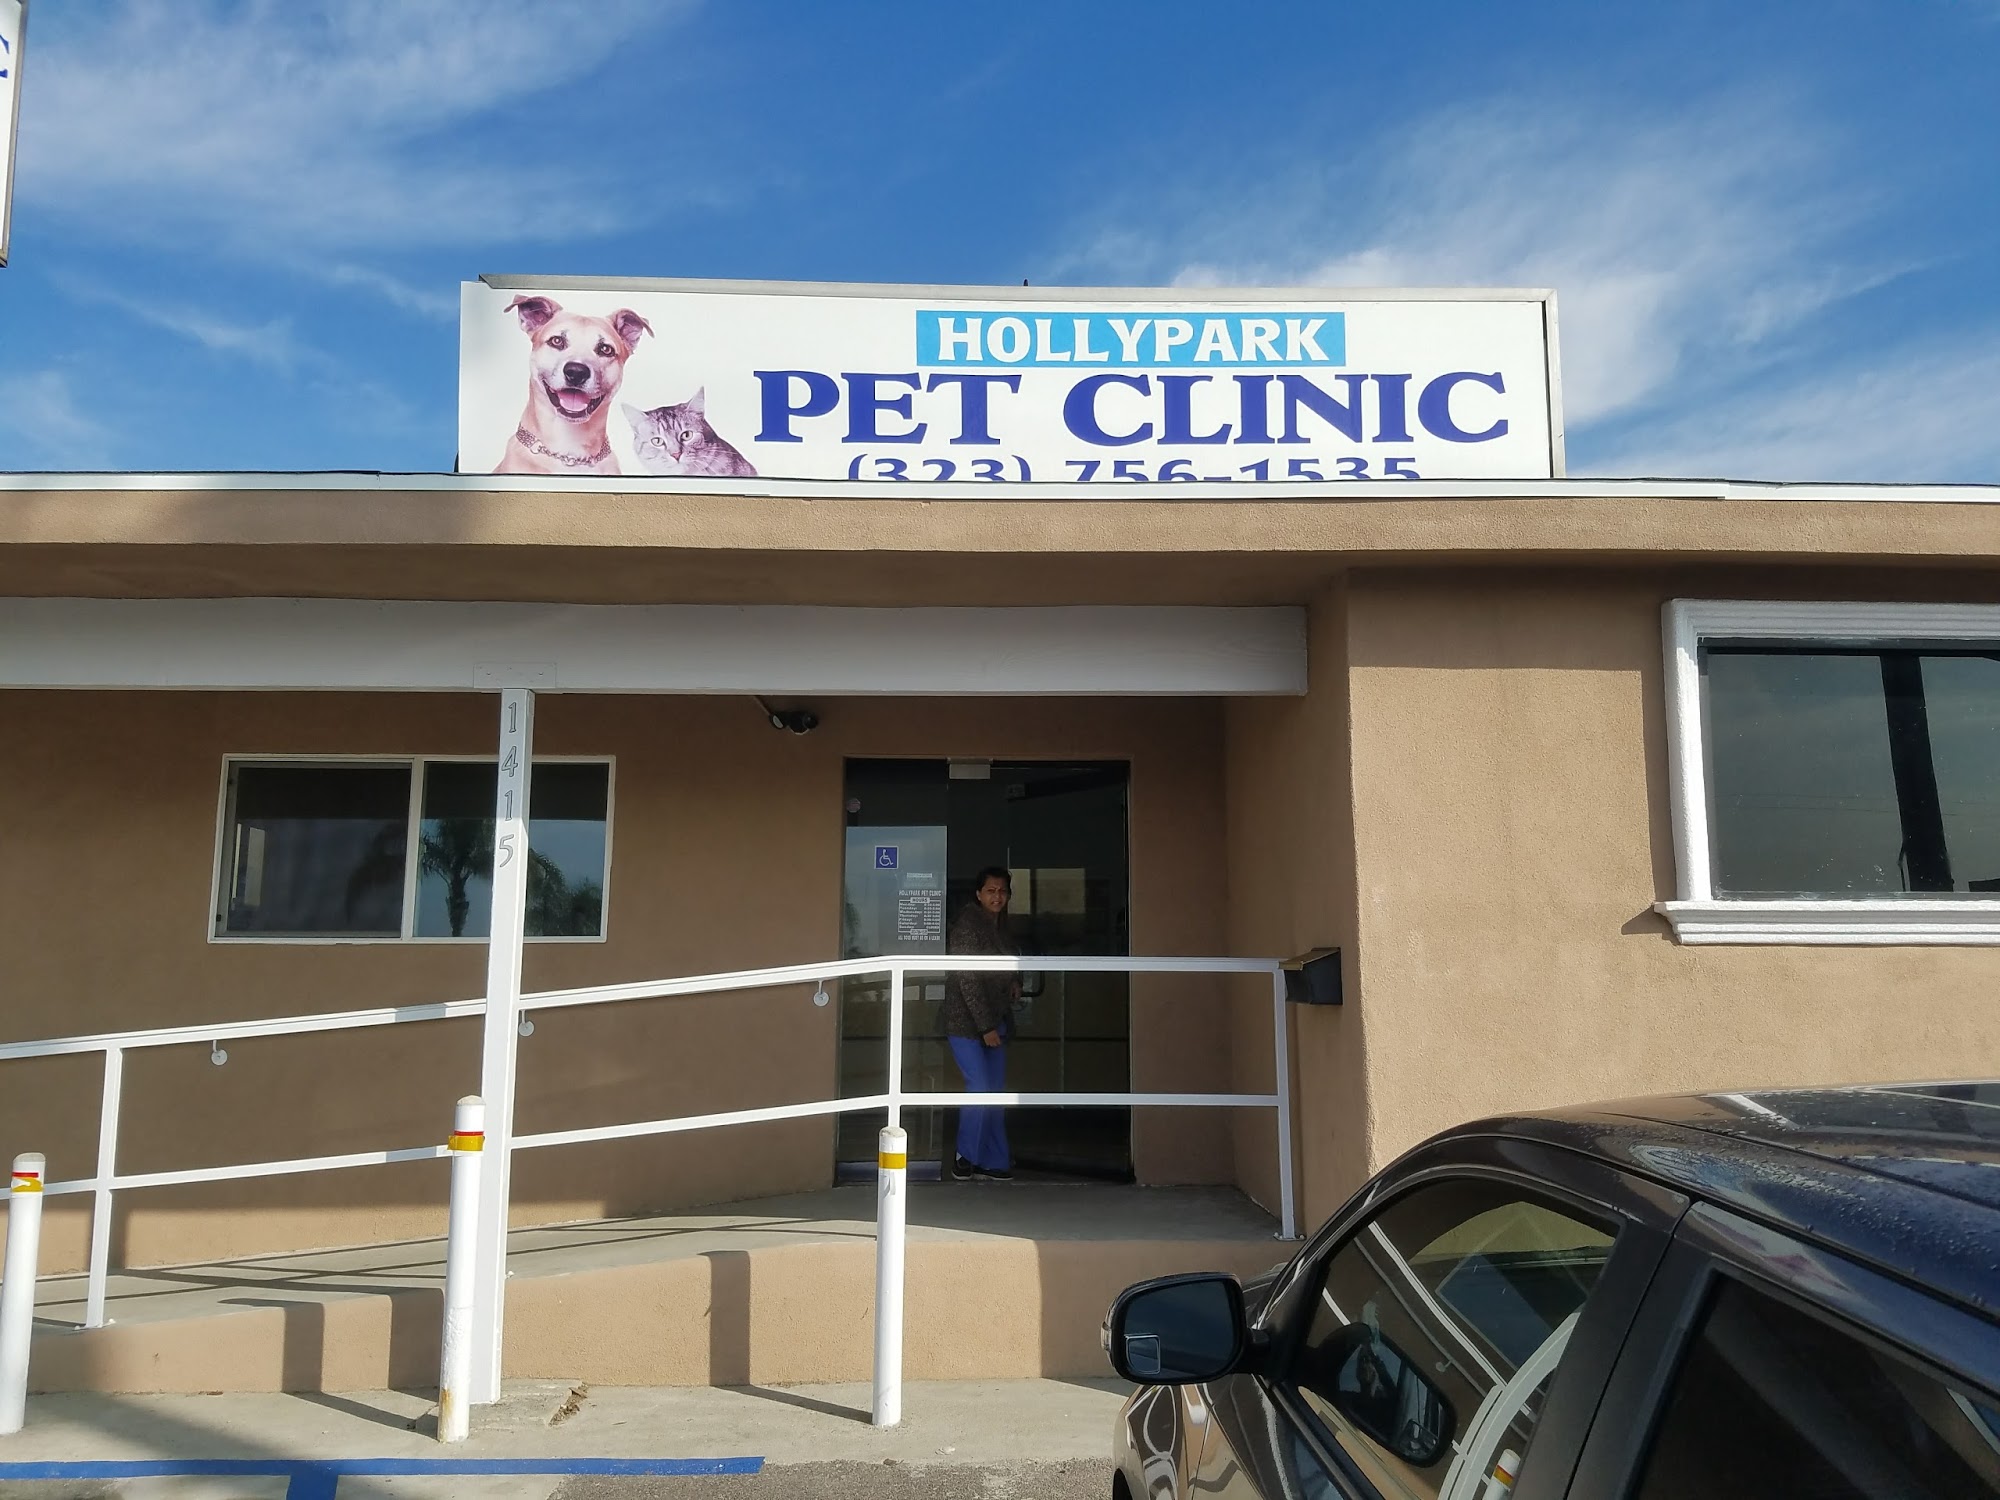 Hollypark Pet Clinic